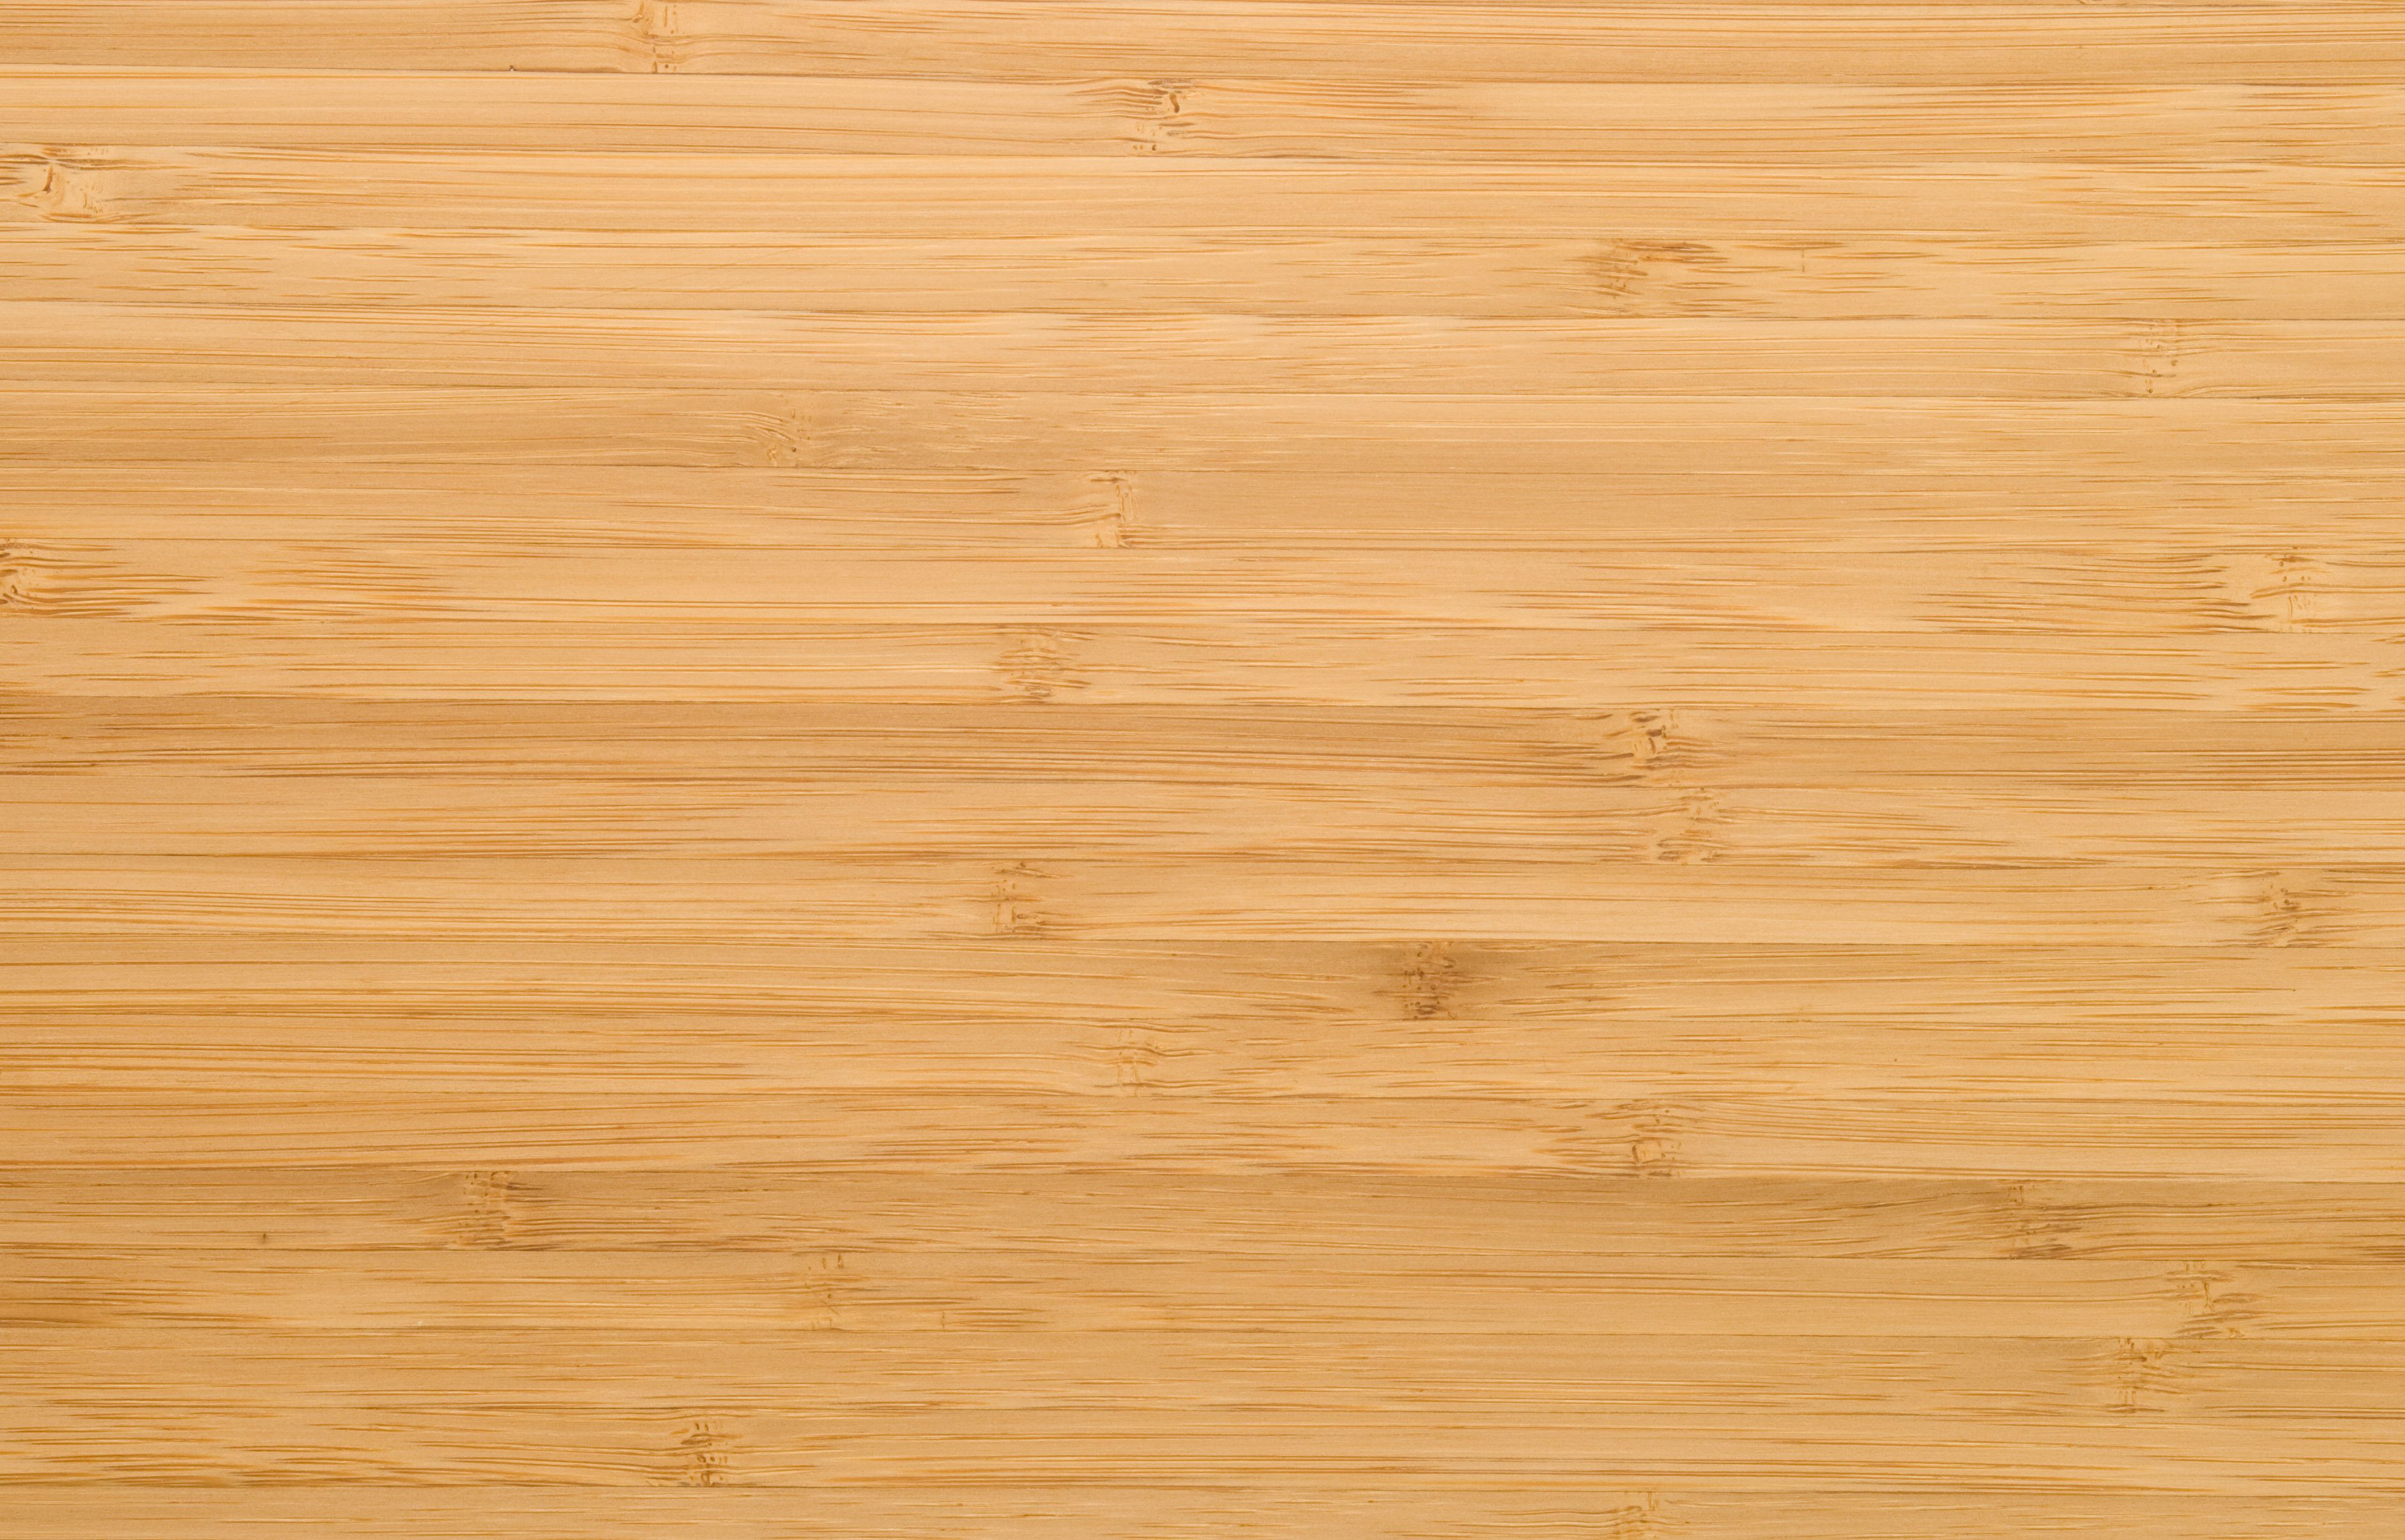 15 Popular Bamboo Flooring Cost Vs Hardwood Cost 2024 free download bamboo flooring cost vs hardwood cost of can you use a wet mop on bamboo floors with natural bamboo plank 94259870 59aeefd4519de20010d5c648